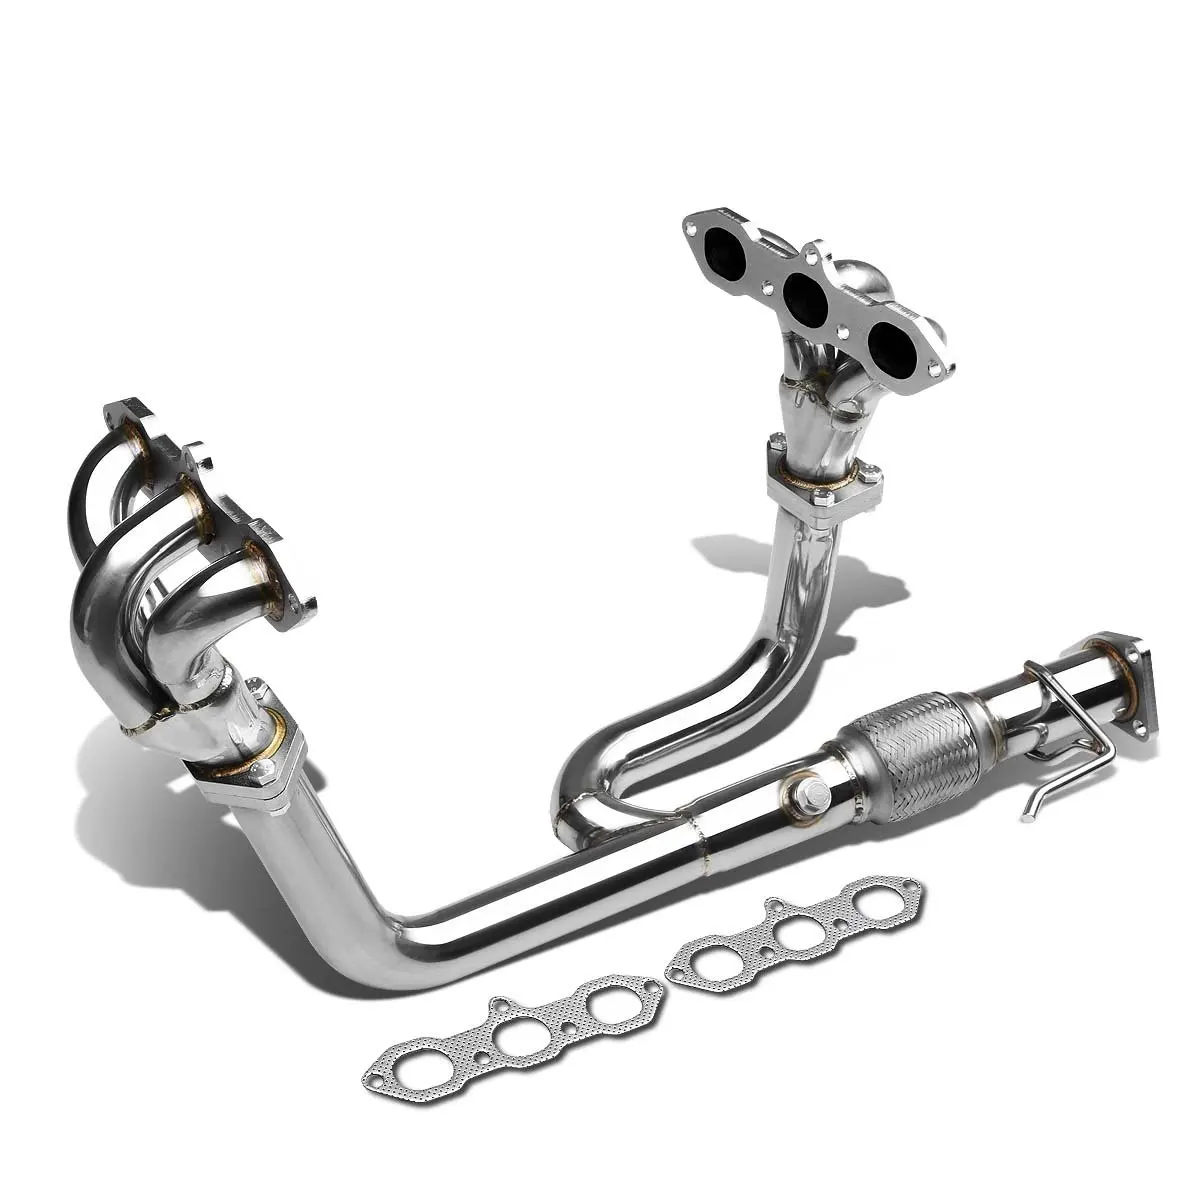 Cheap Accord V6 Exhaust, find Accord V6 Exhaust deals on line at